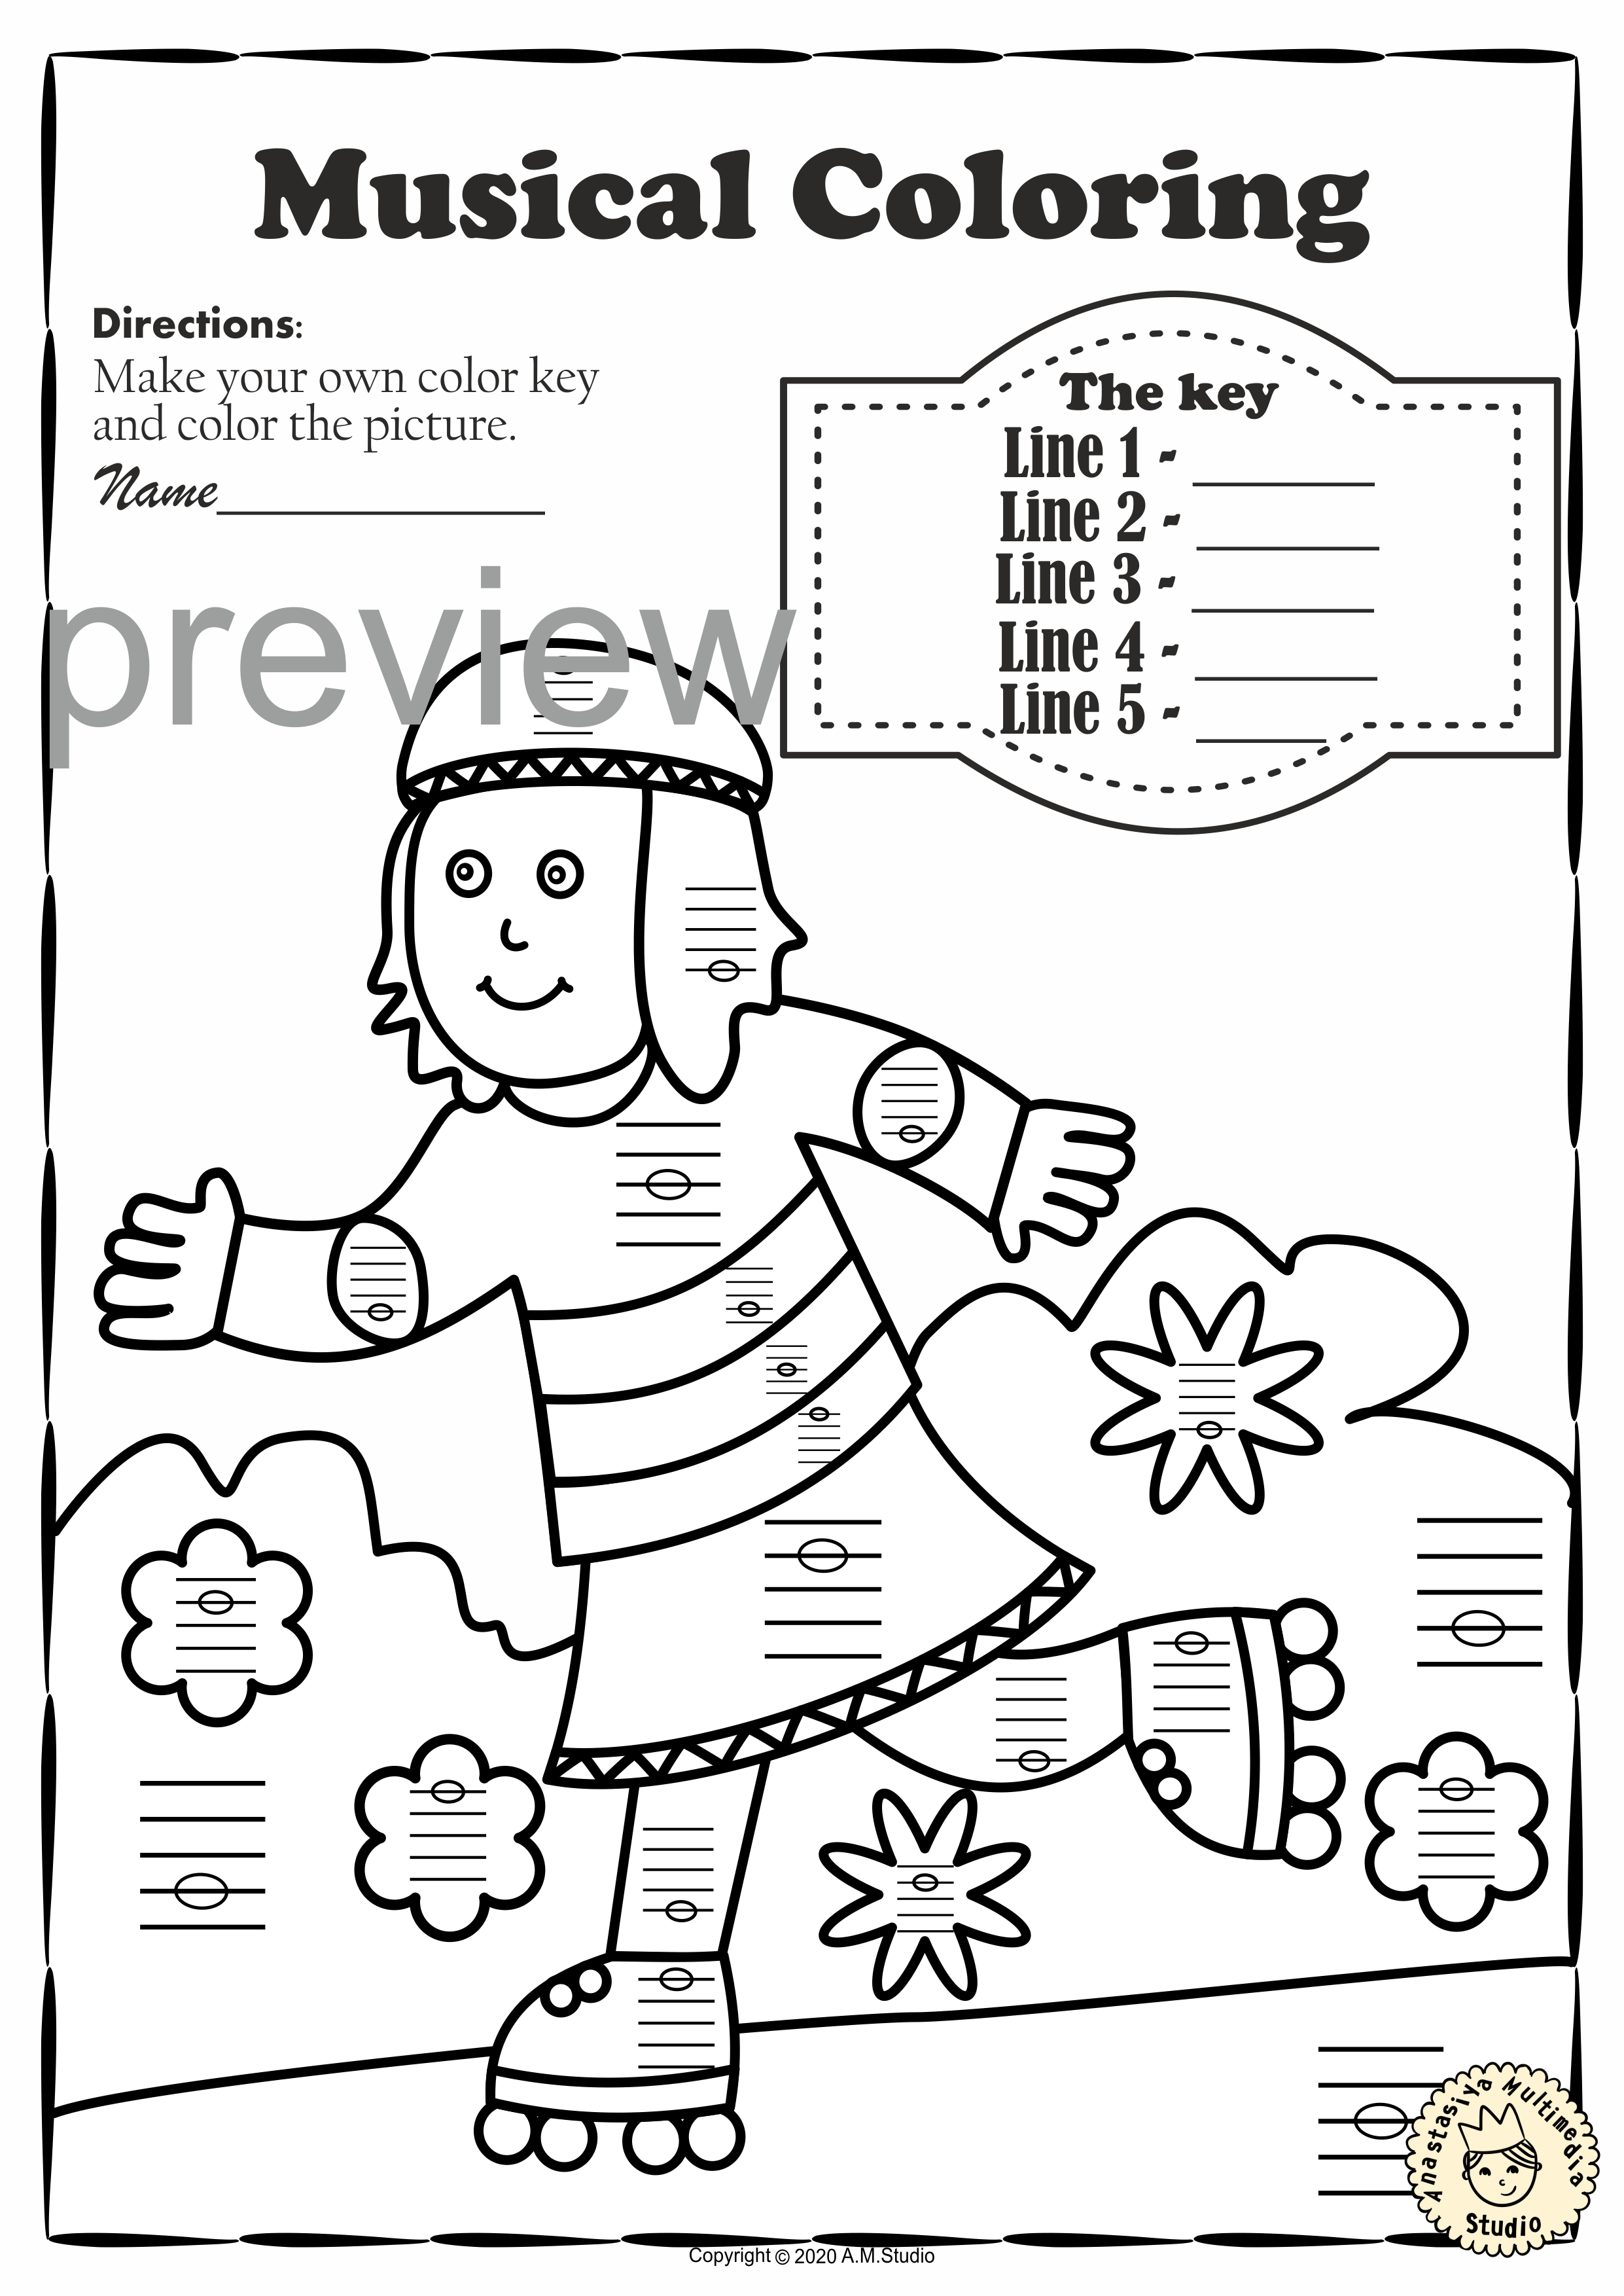 Summer Music Coloring Pages | Lines and Spaces Coloring Worksheets (img # 5)